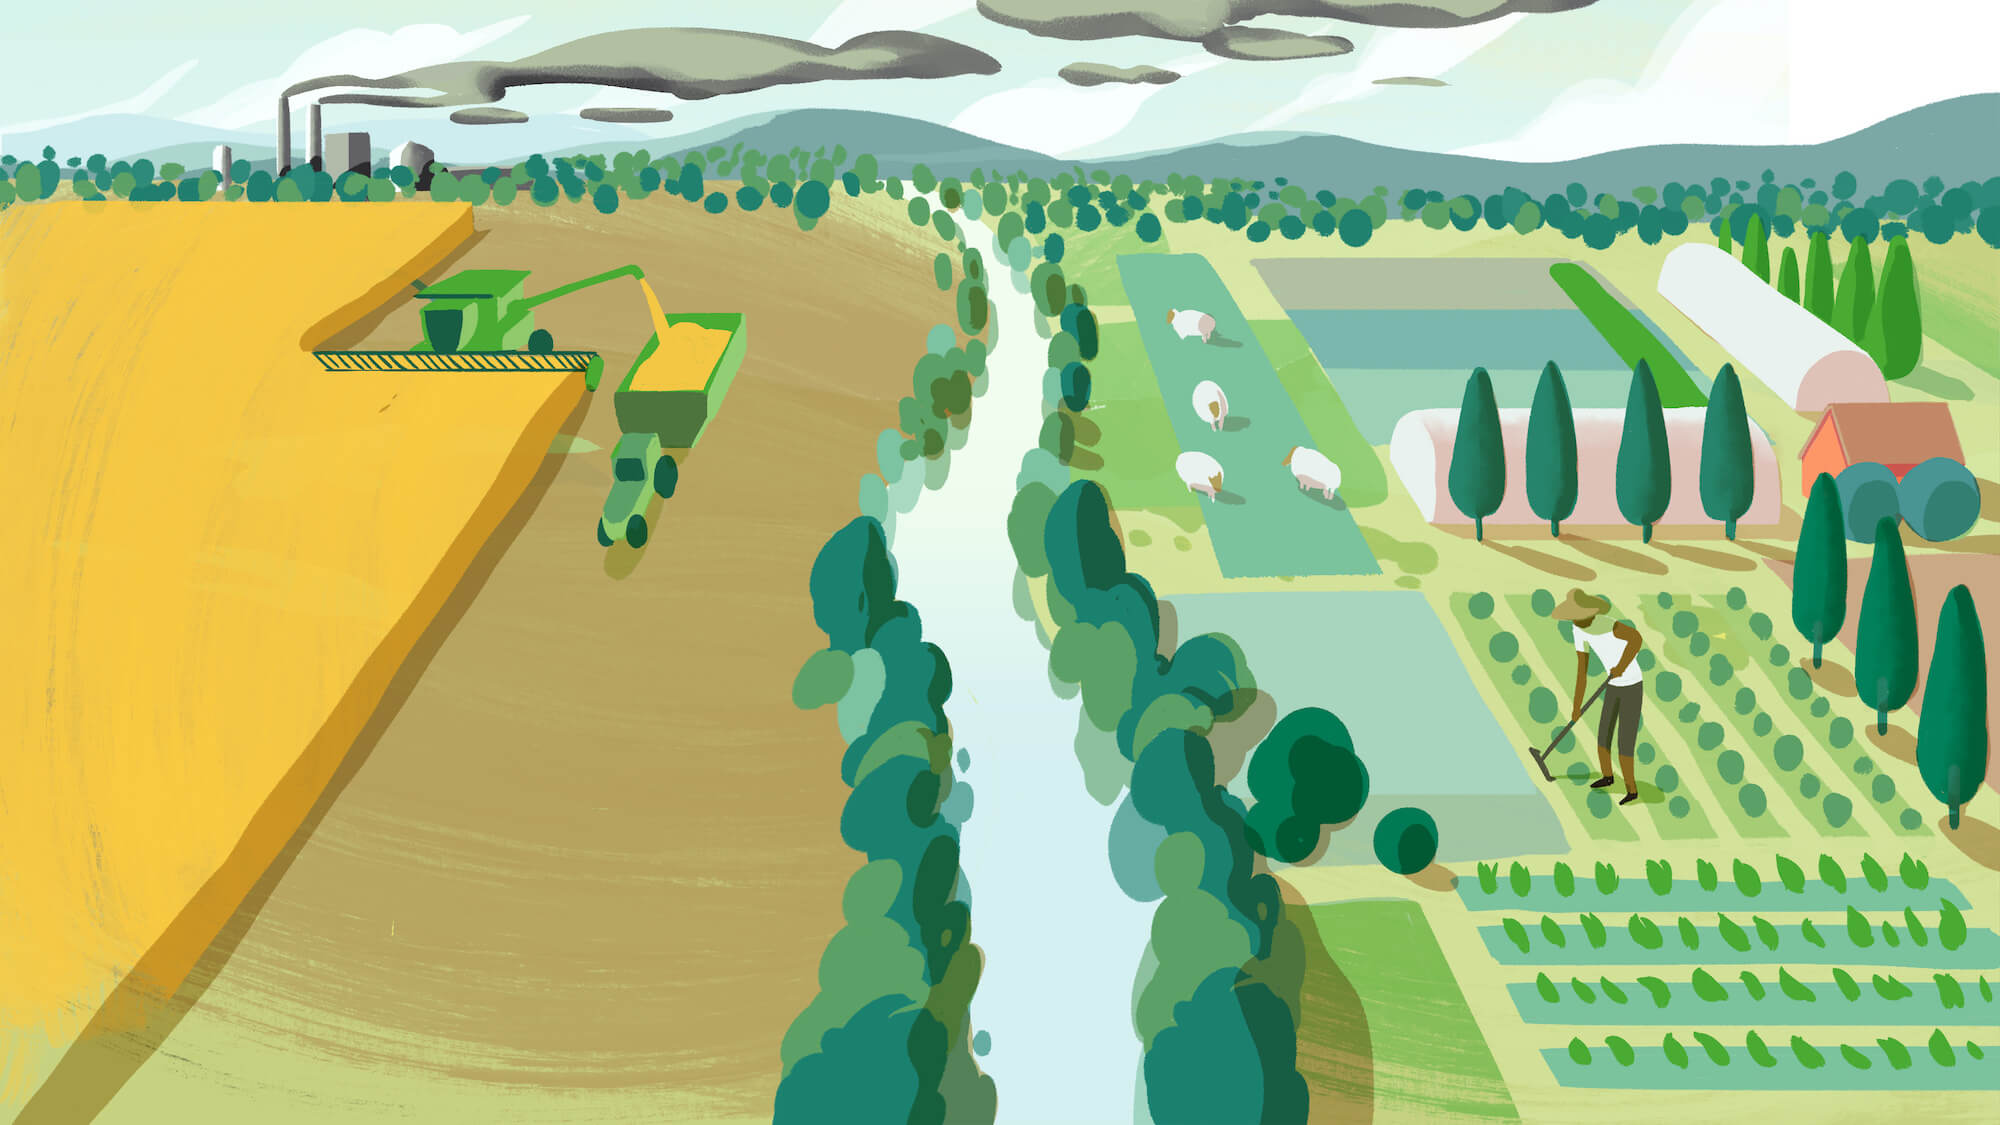 Illustration of a conventional grain farm across from a farm using the principles of regenerative agriculture (May 2021)